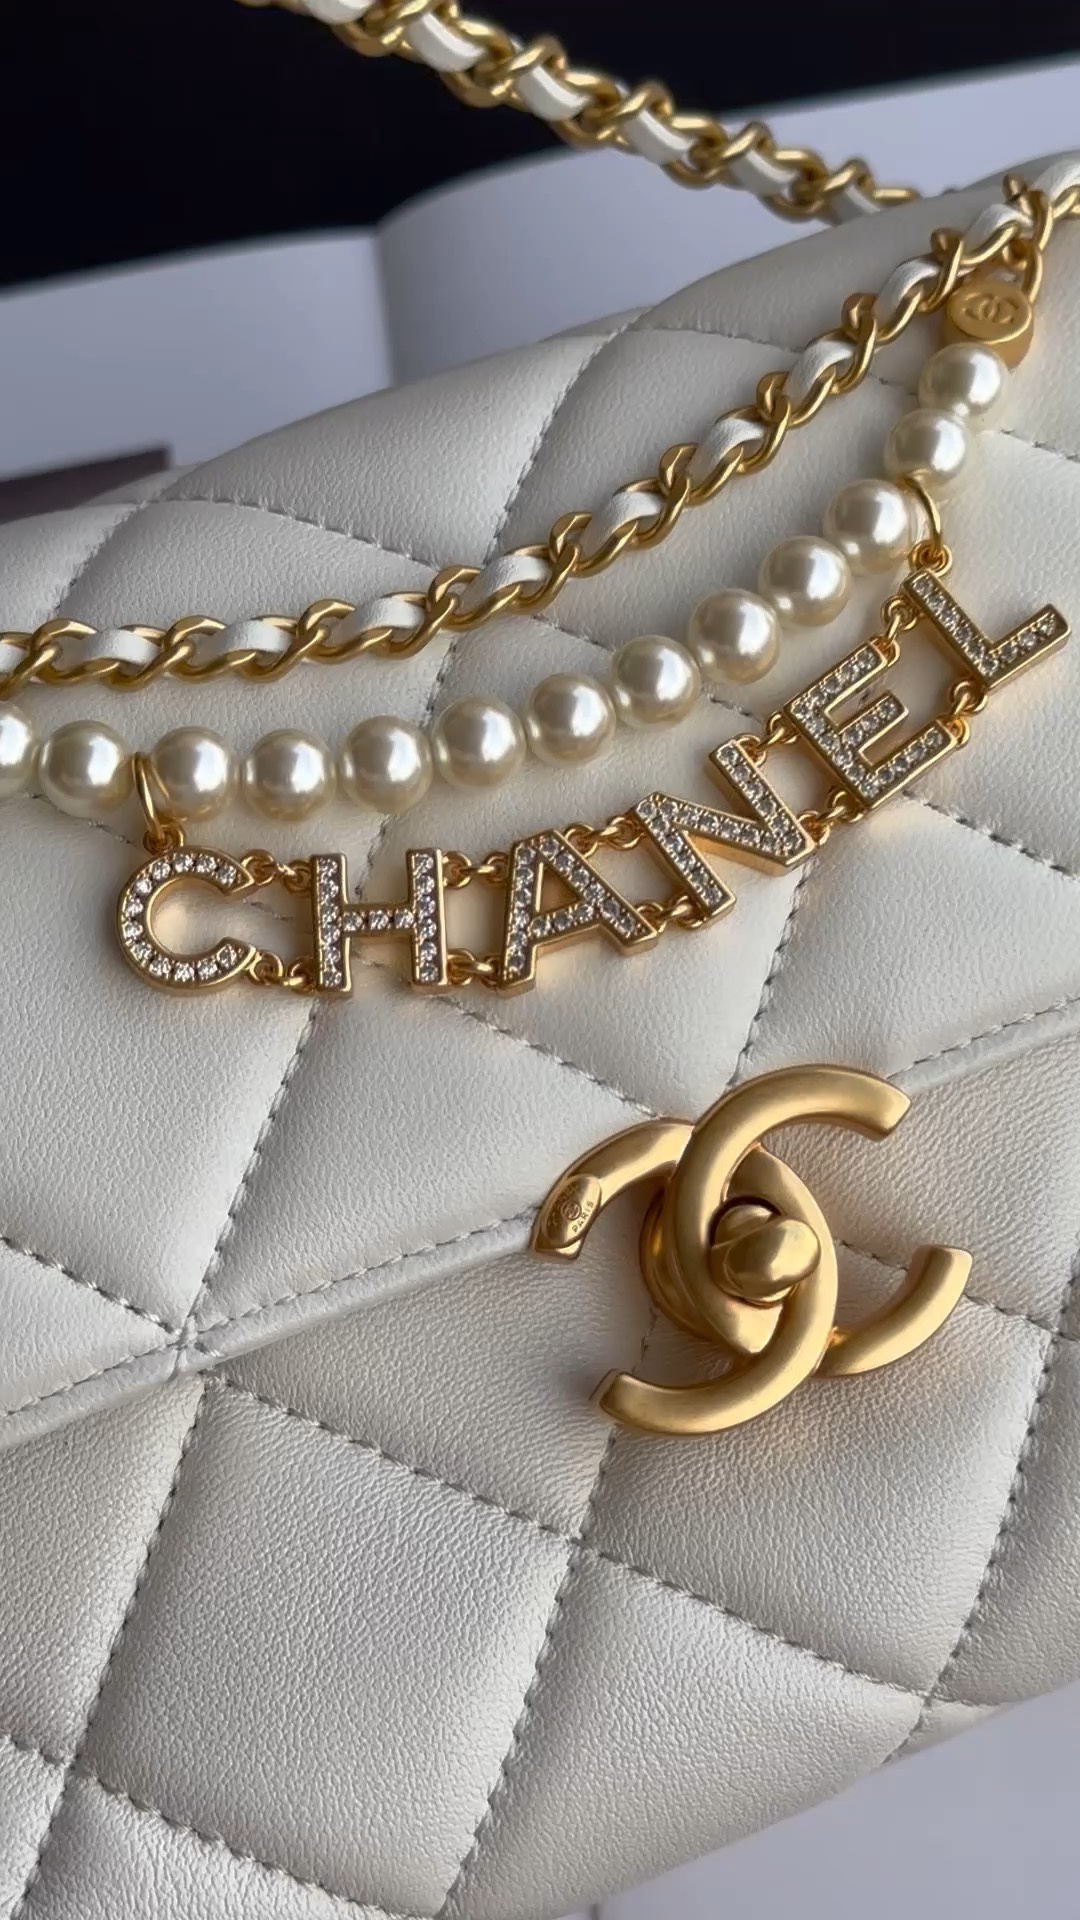 Chanel Classic Flap Bag Crossbody & Shoulder Bags High Quality 1:1 Replica
 White Chains